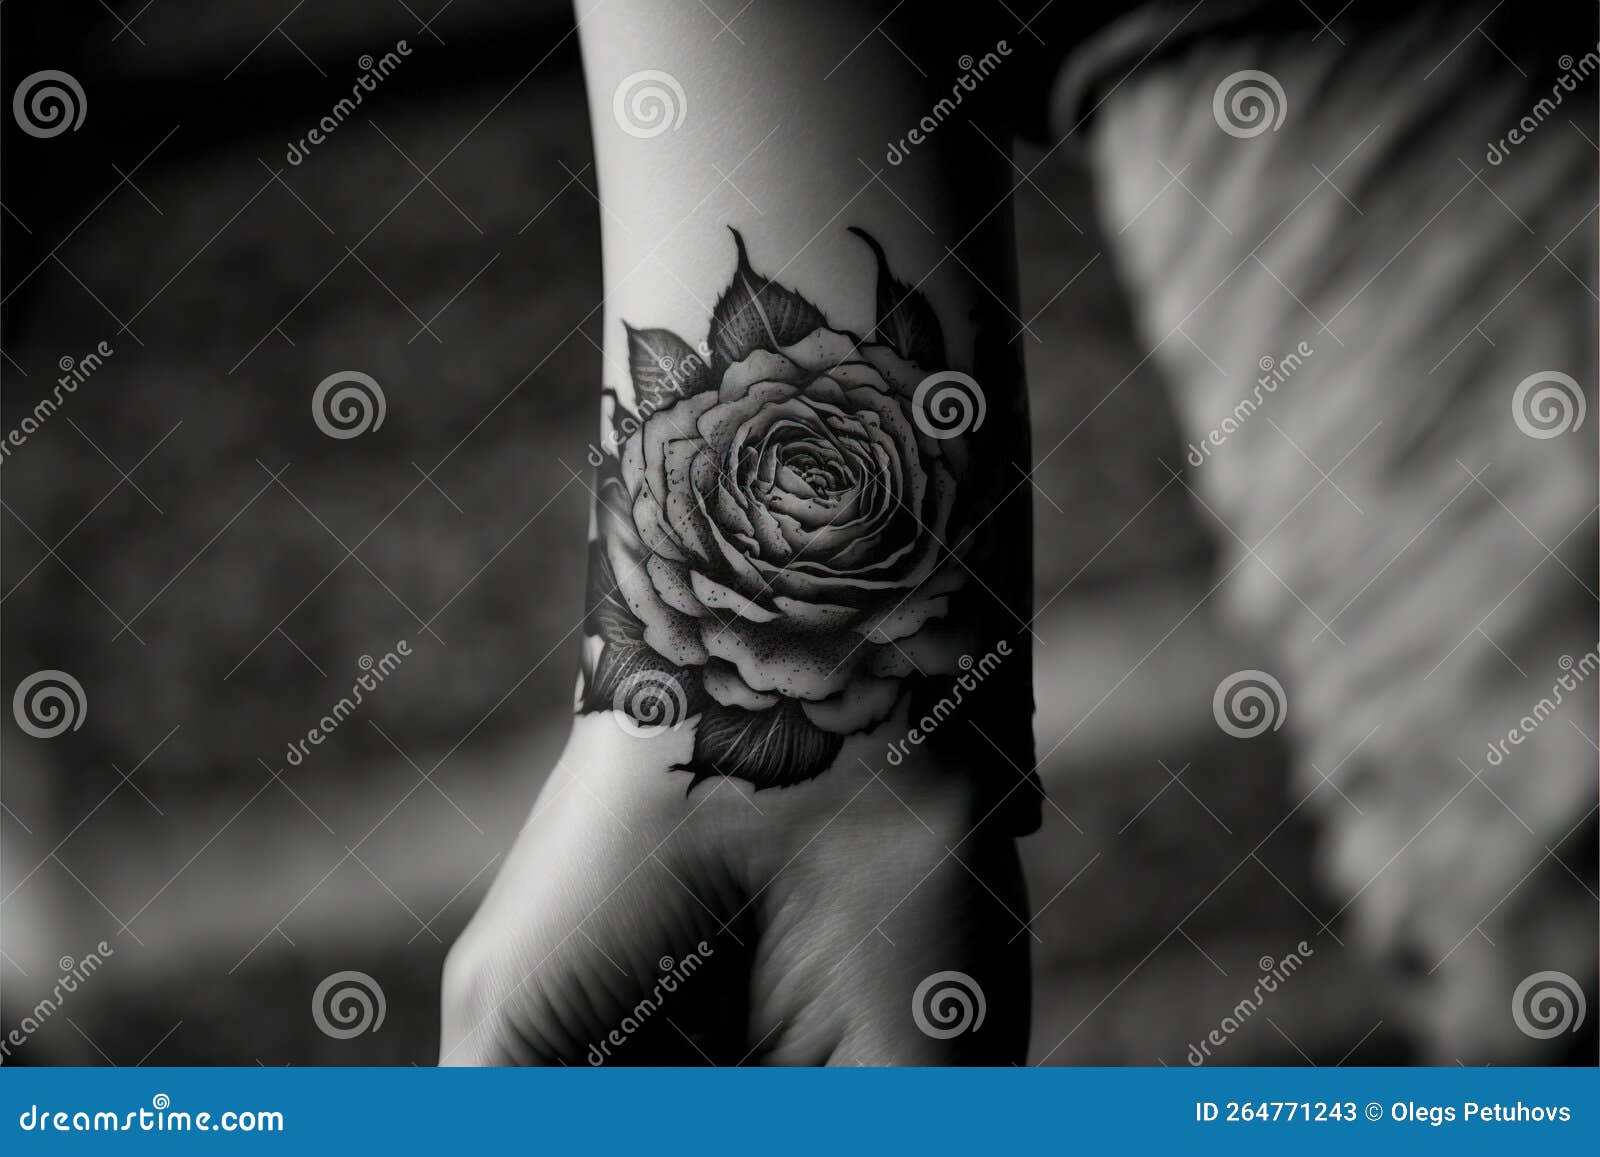 Ashley Crow Tattoo  hand holding a rose from a few days ago I some  space left in October please email ashbtattoosgmailcom for bookings    Facebook